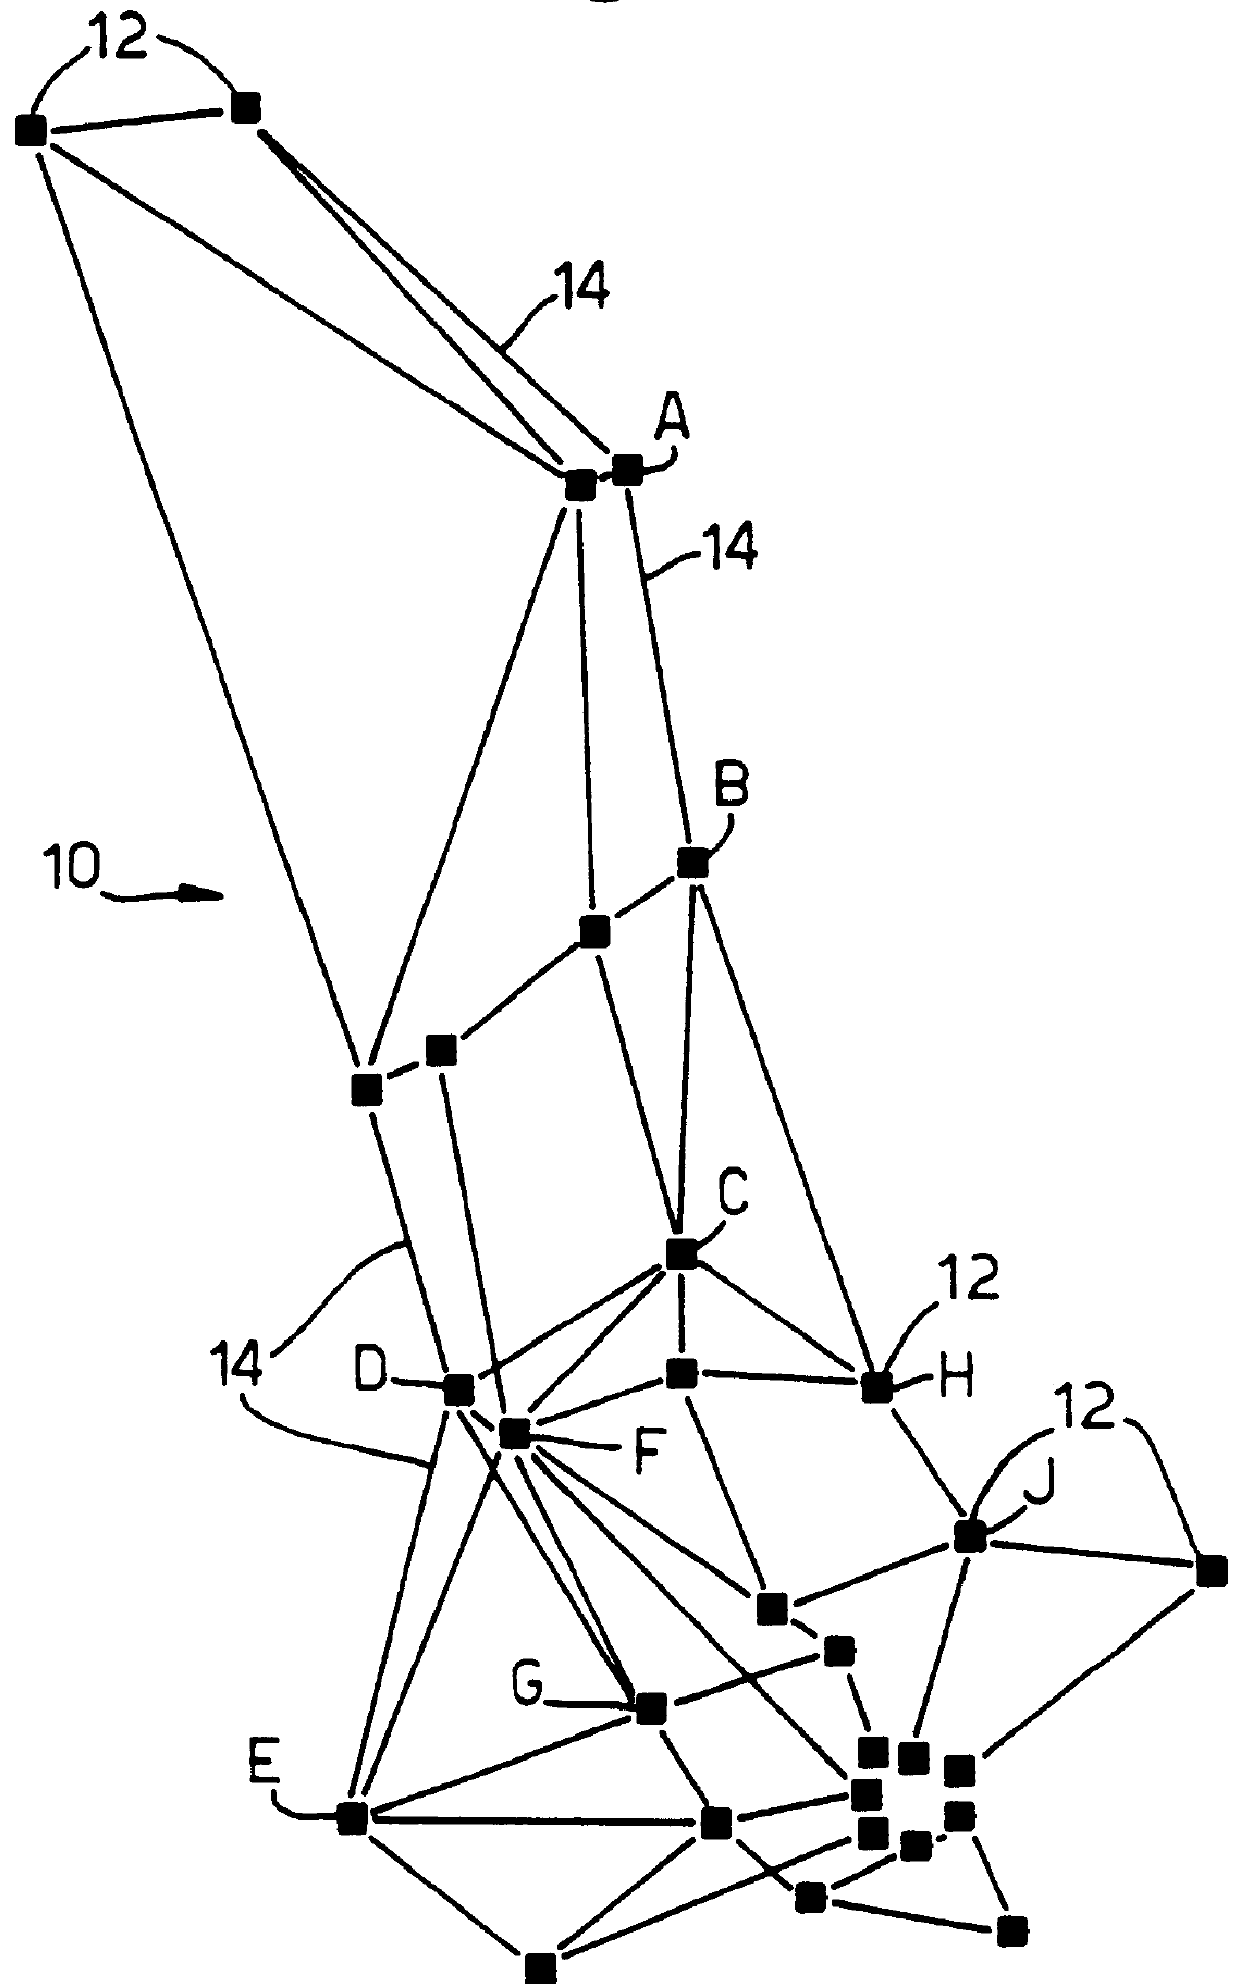 Route finding in communication networks